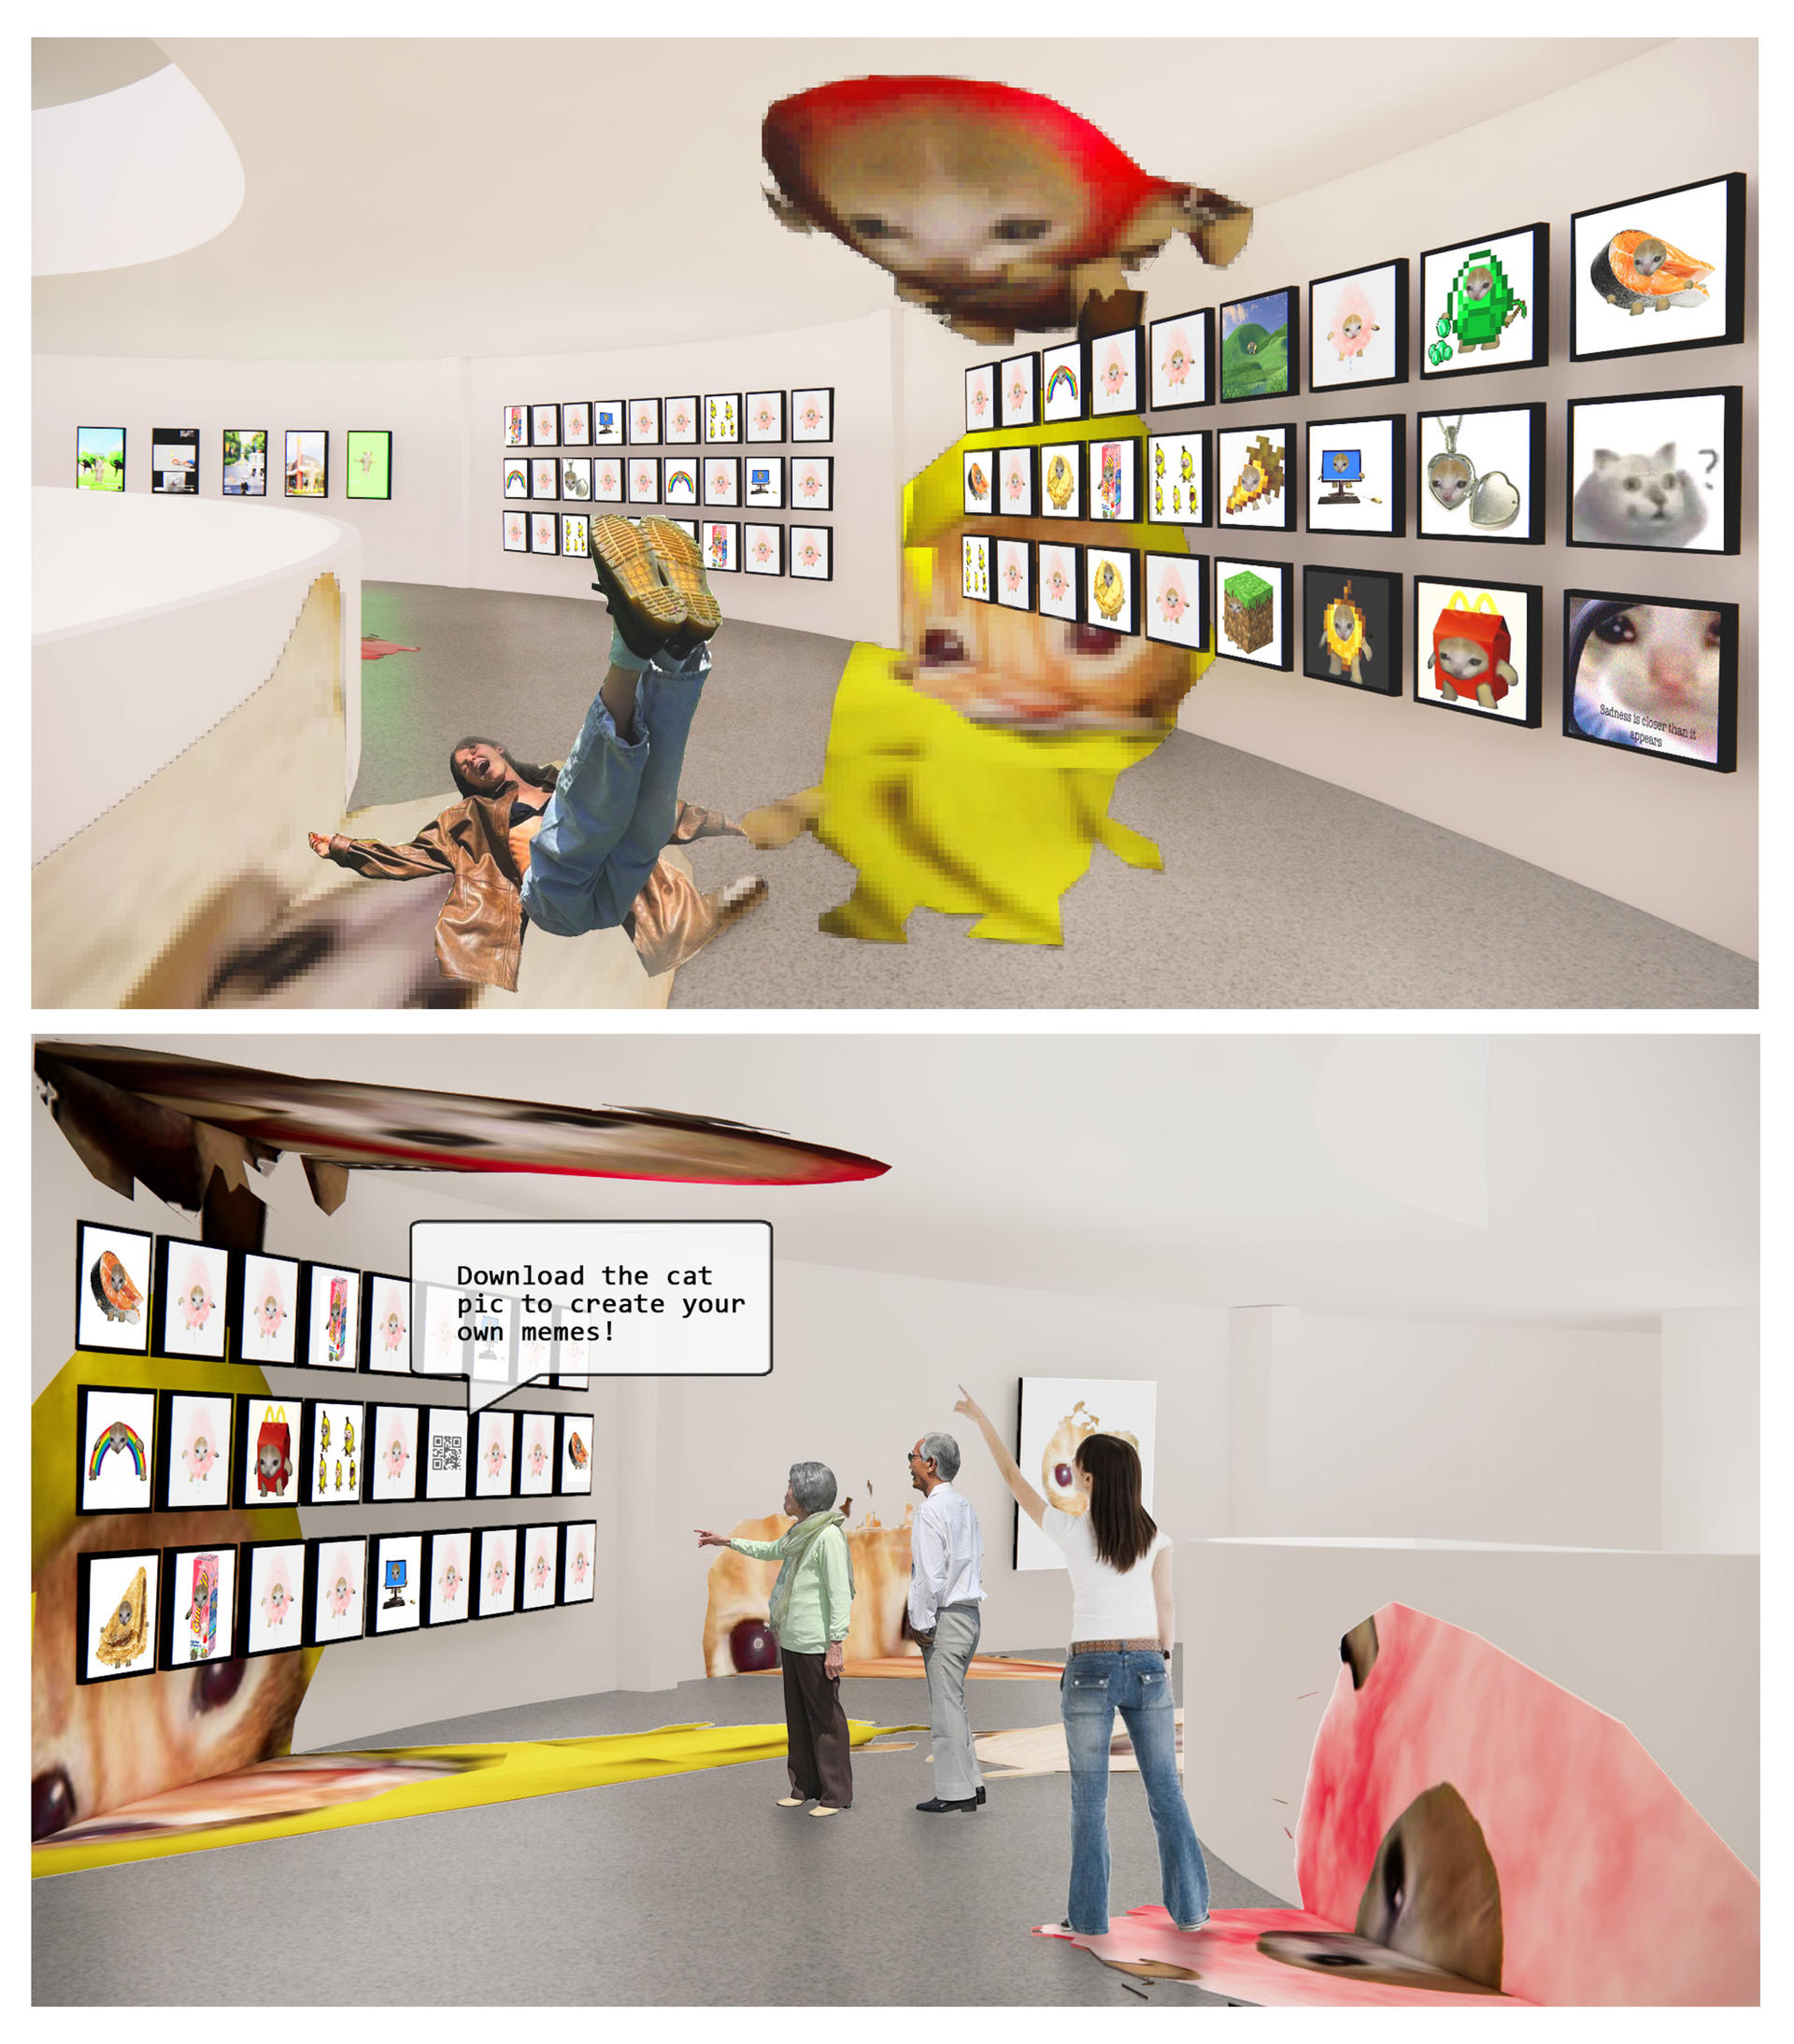 Rendering showing the meme section and anamorphism